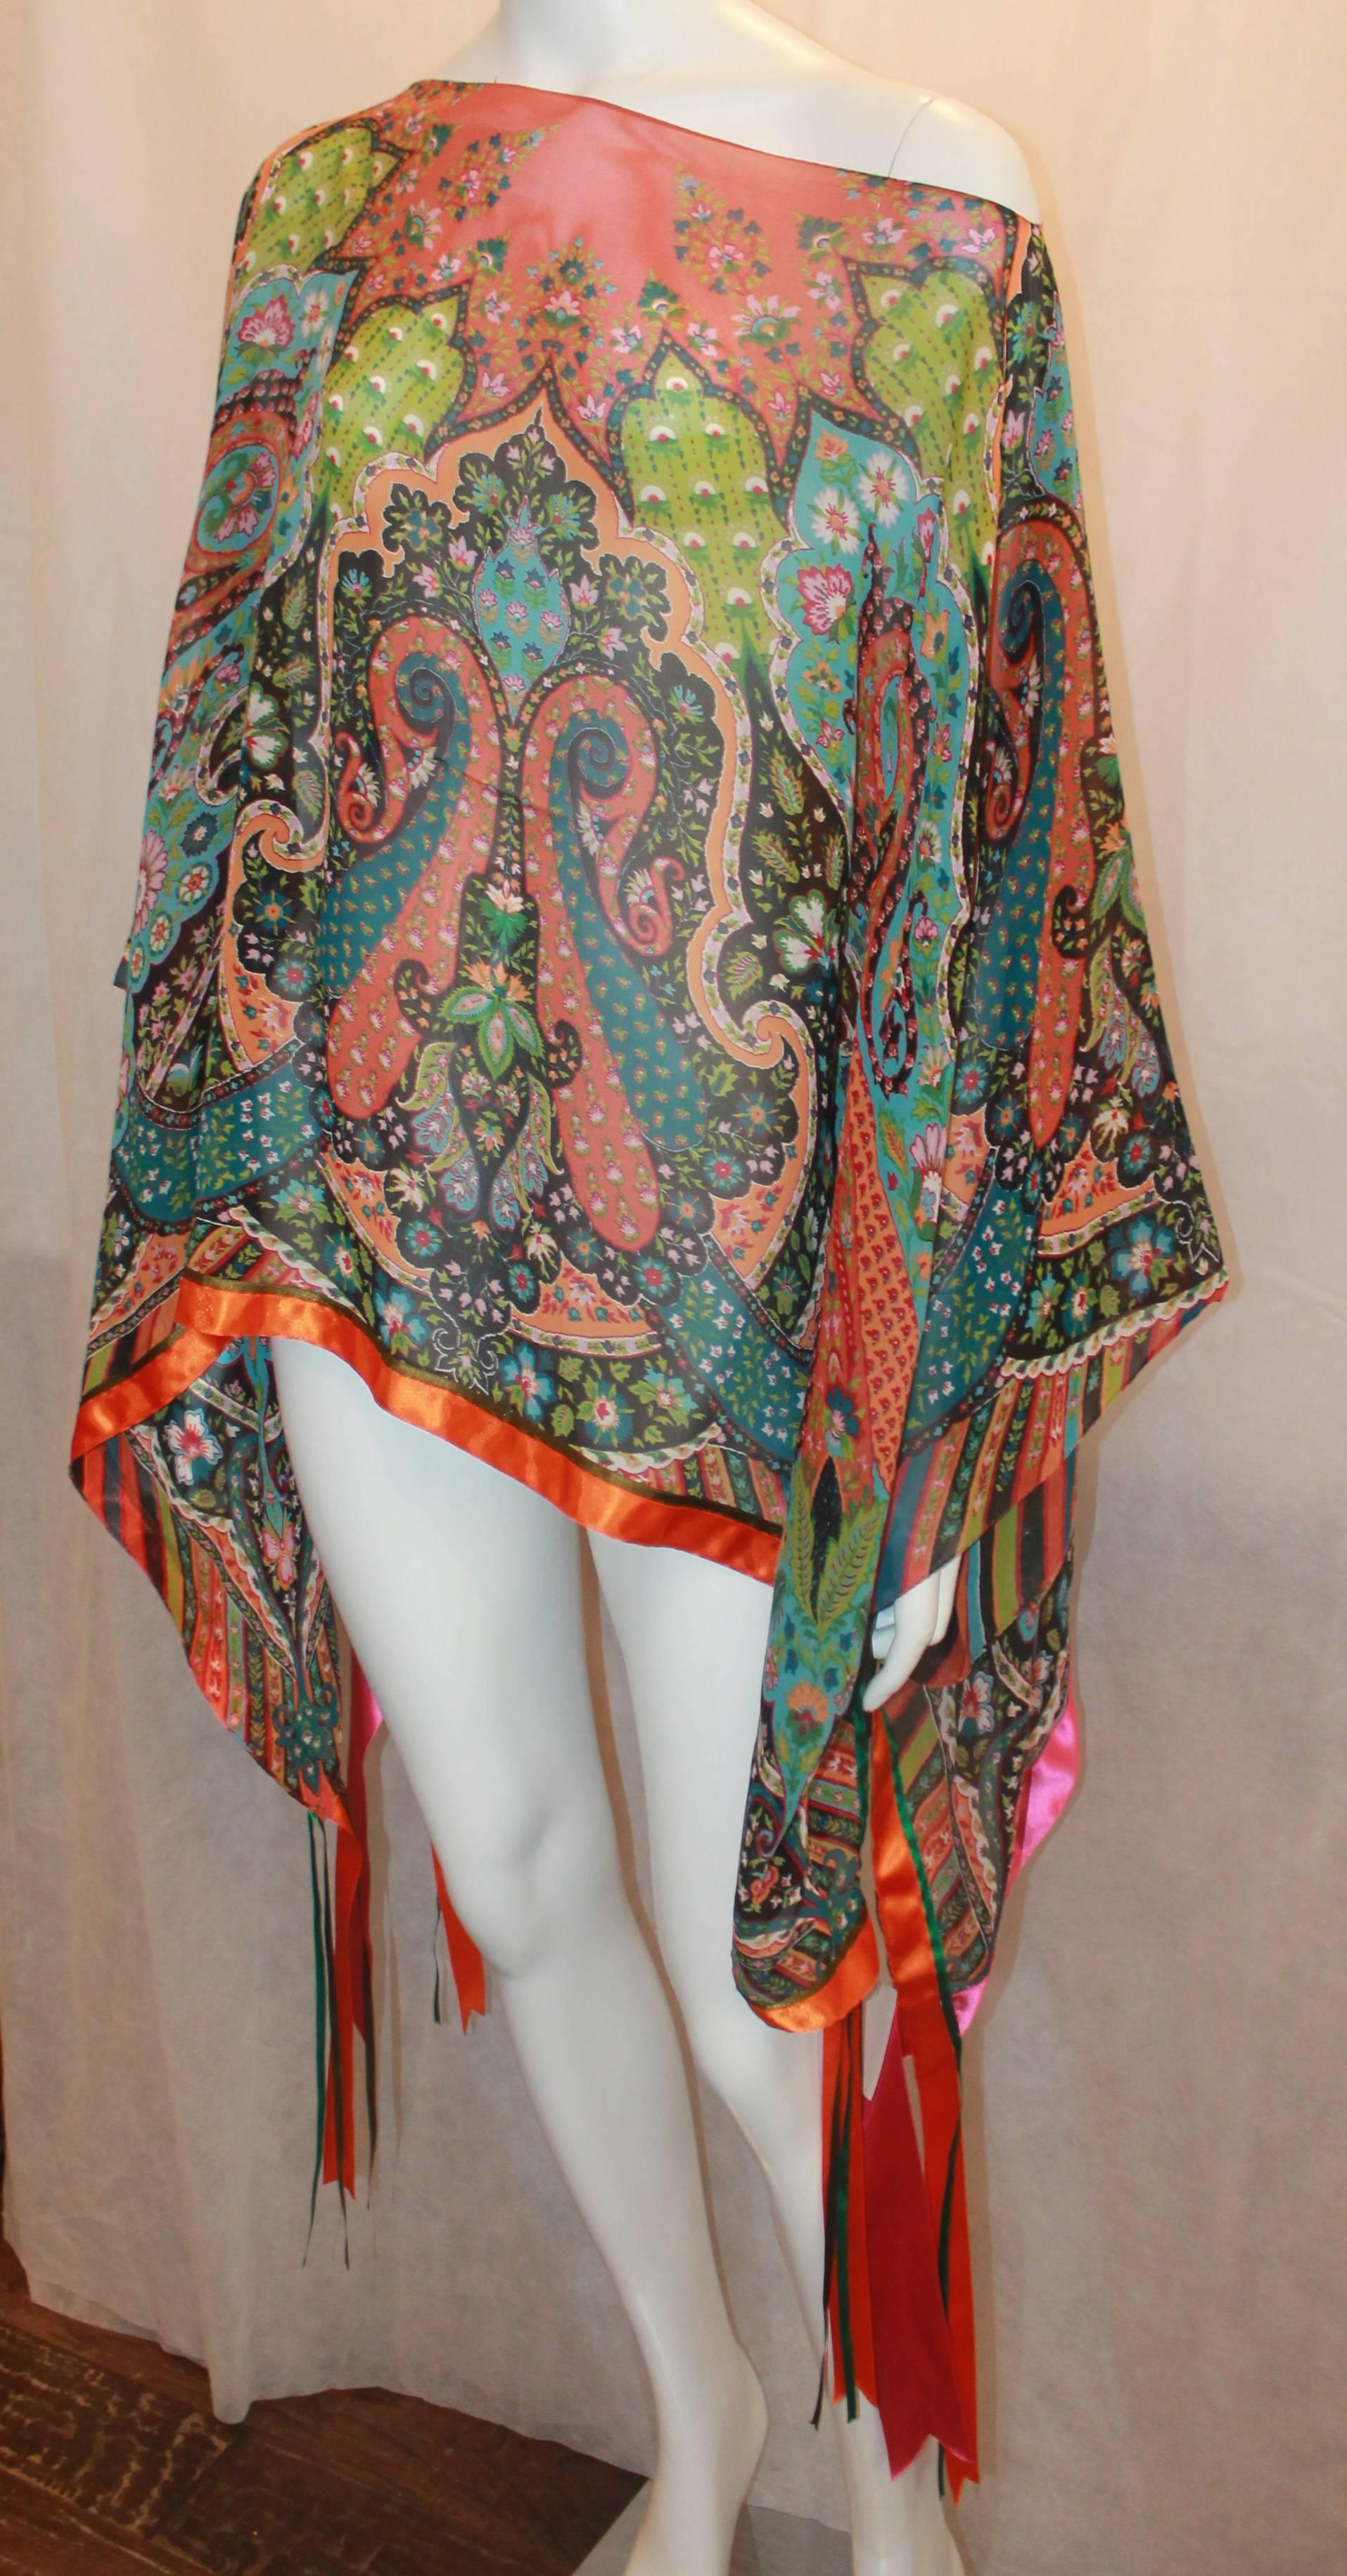 Etro Multi-Colored Paisley Print Silk Chiffon Poncho w/ Ribbon Trim & Hanging Ribbon - OS.  This unique blouse is in excellent condition.  It features a multi colored silk chiffon paisley print fabric, a wide neck slit, an orange, green, and pink